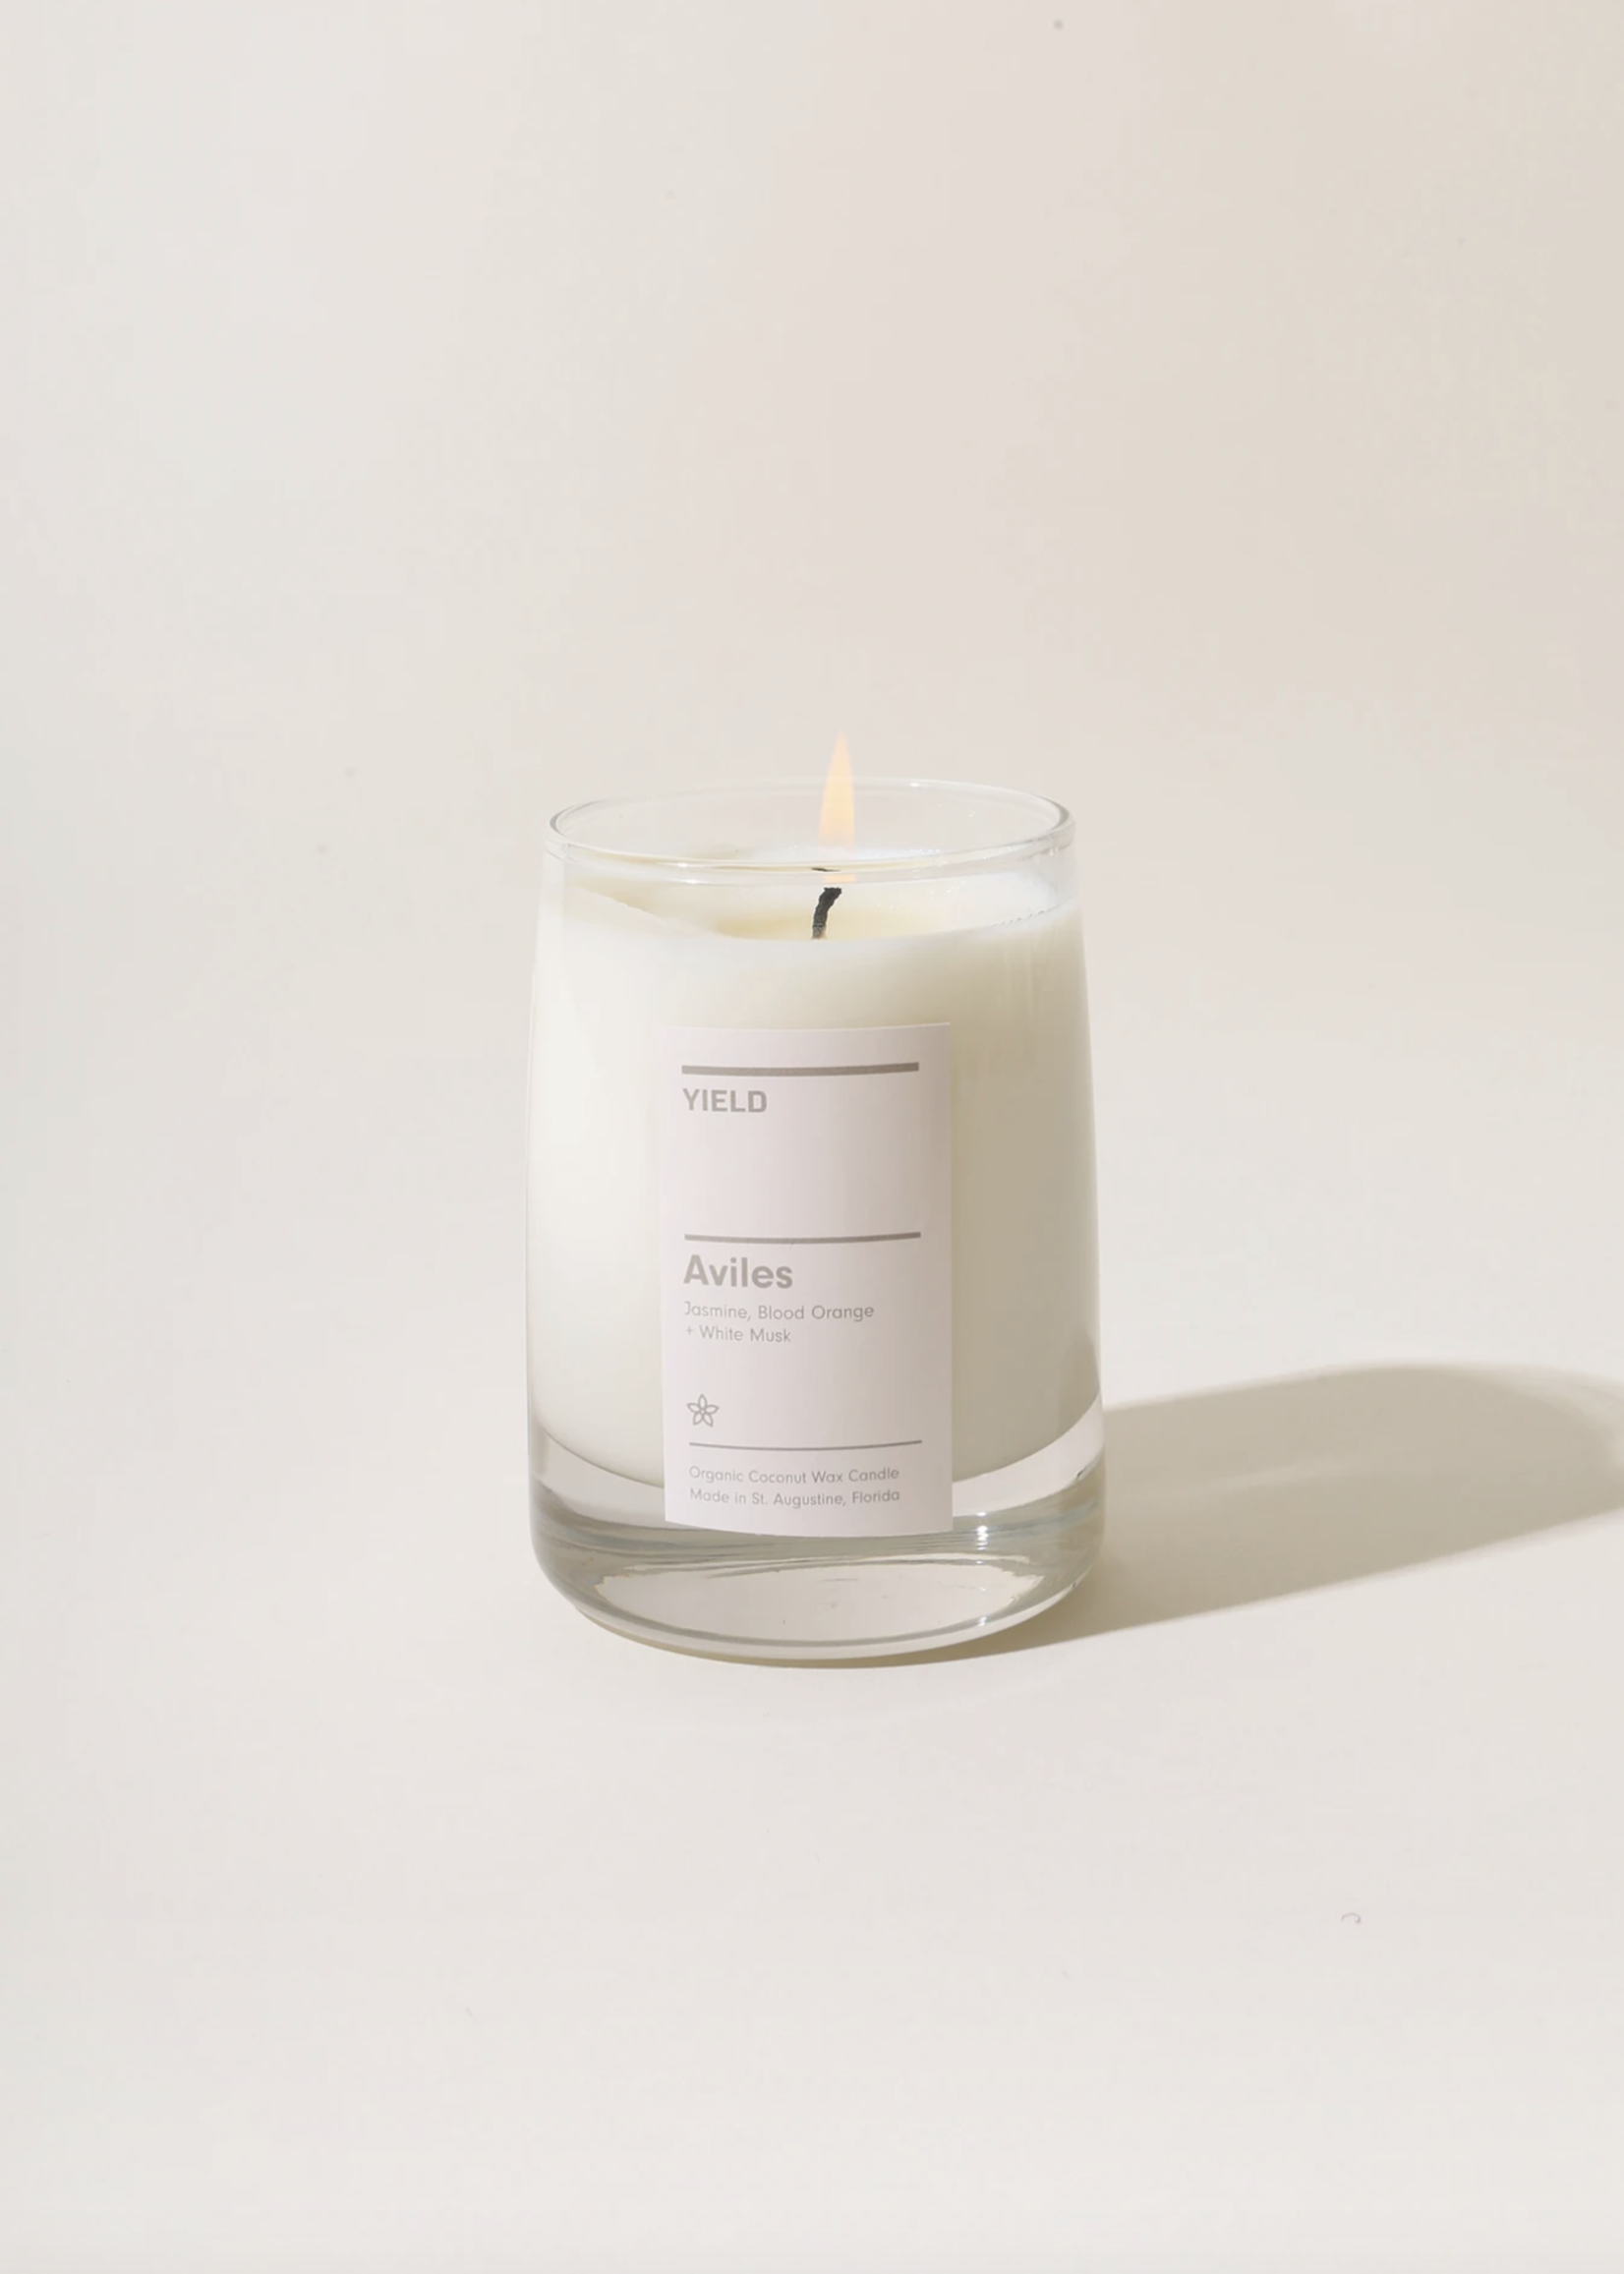 Yield Design 8oz Candles by Yield